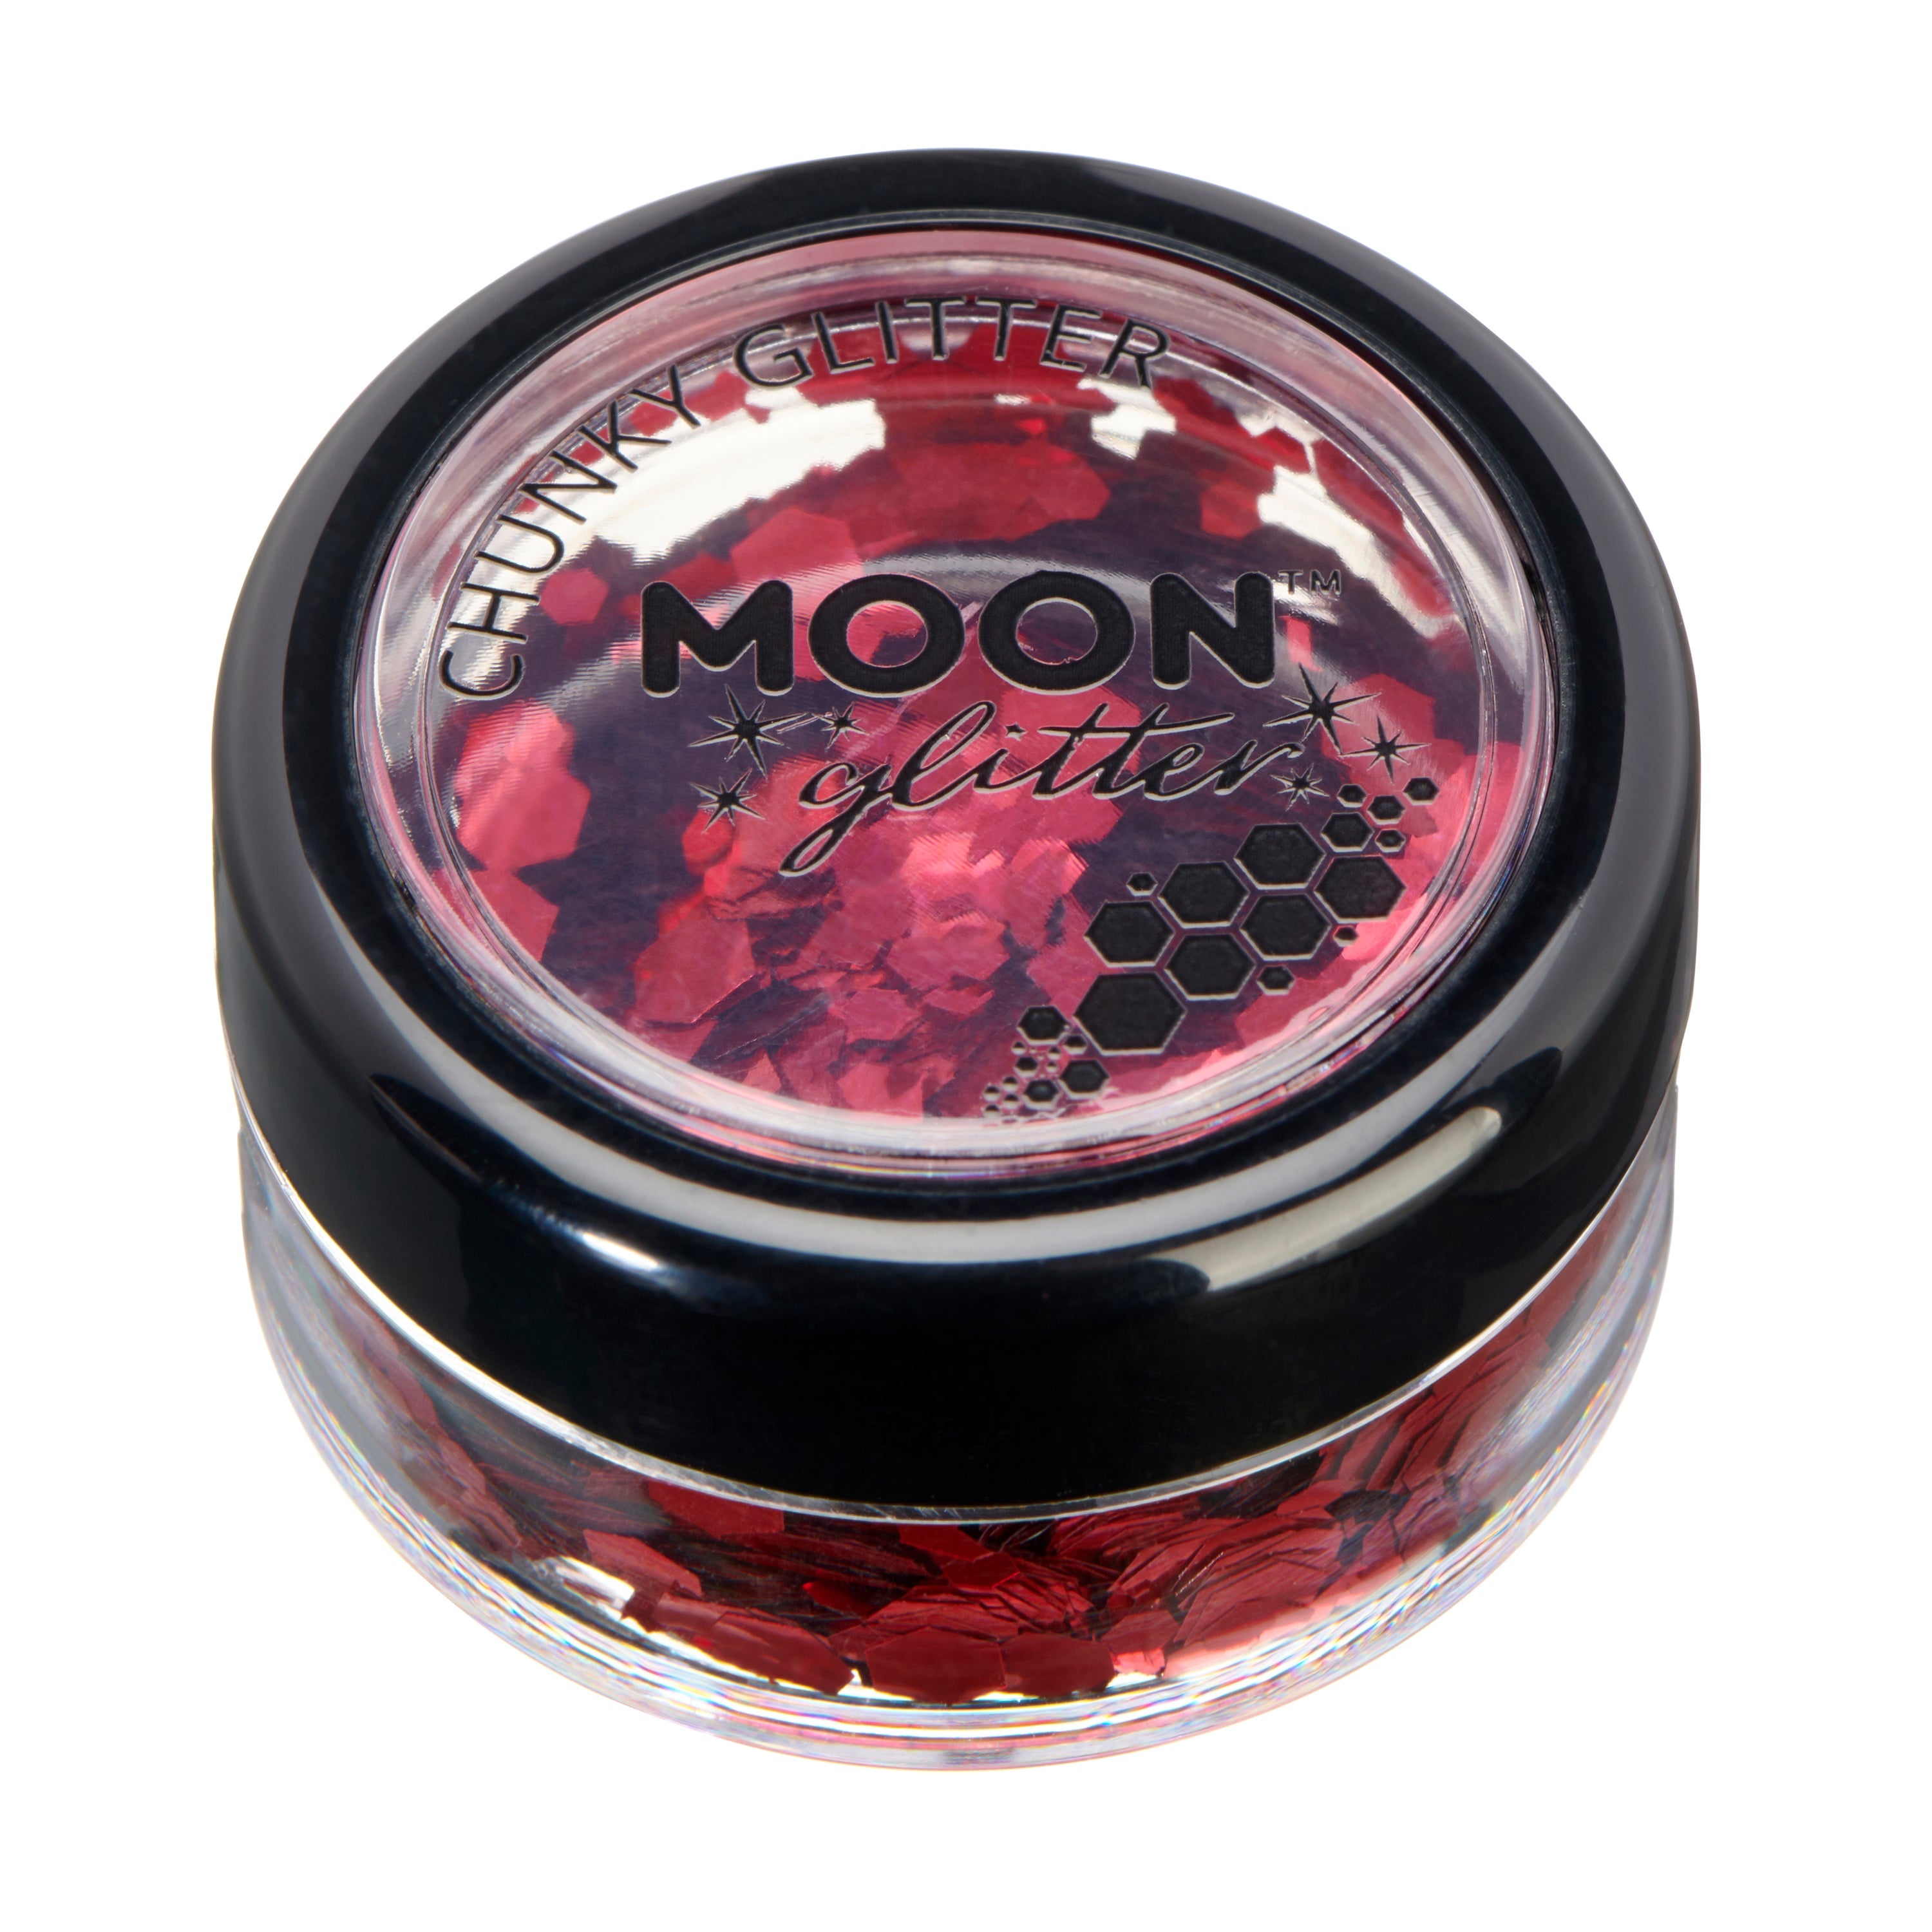 Red - Classic Chunky Face & Body Glitter, 3g. Cosmetically certified, FDA & Health Canada compliant, cruelty free and vegan.